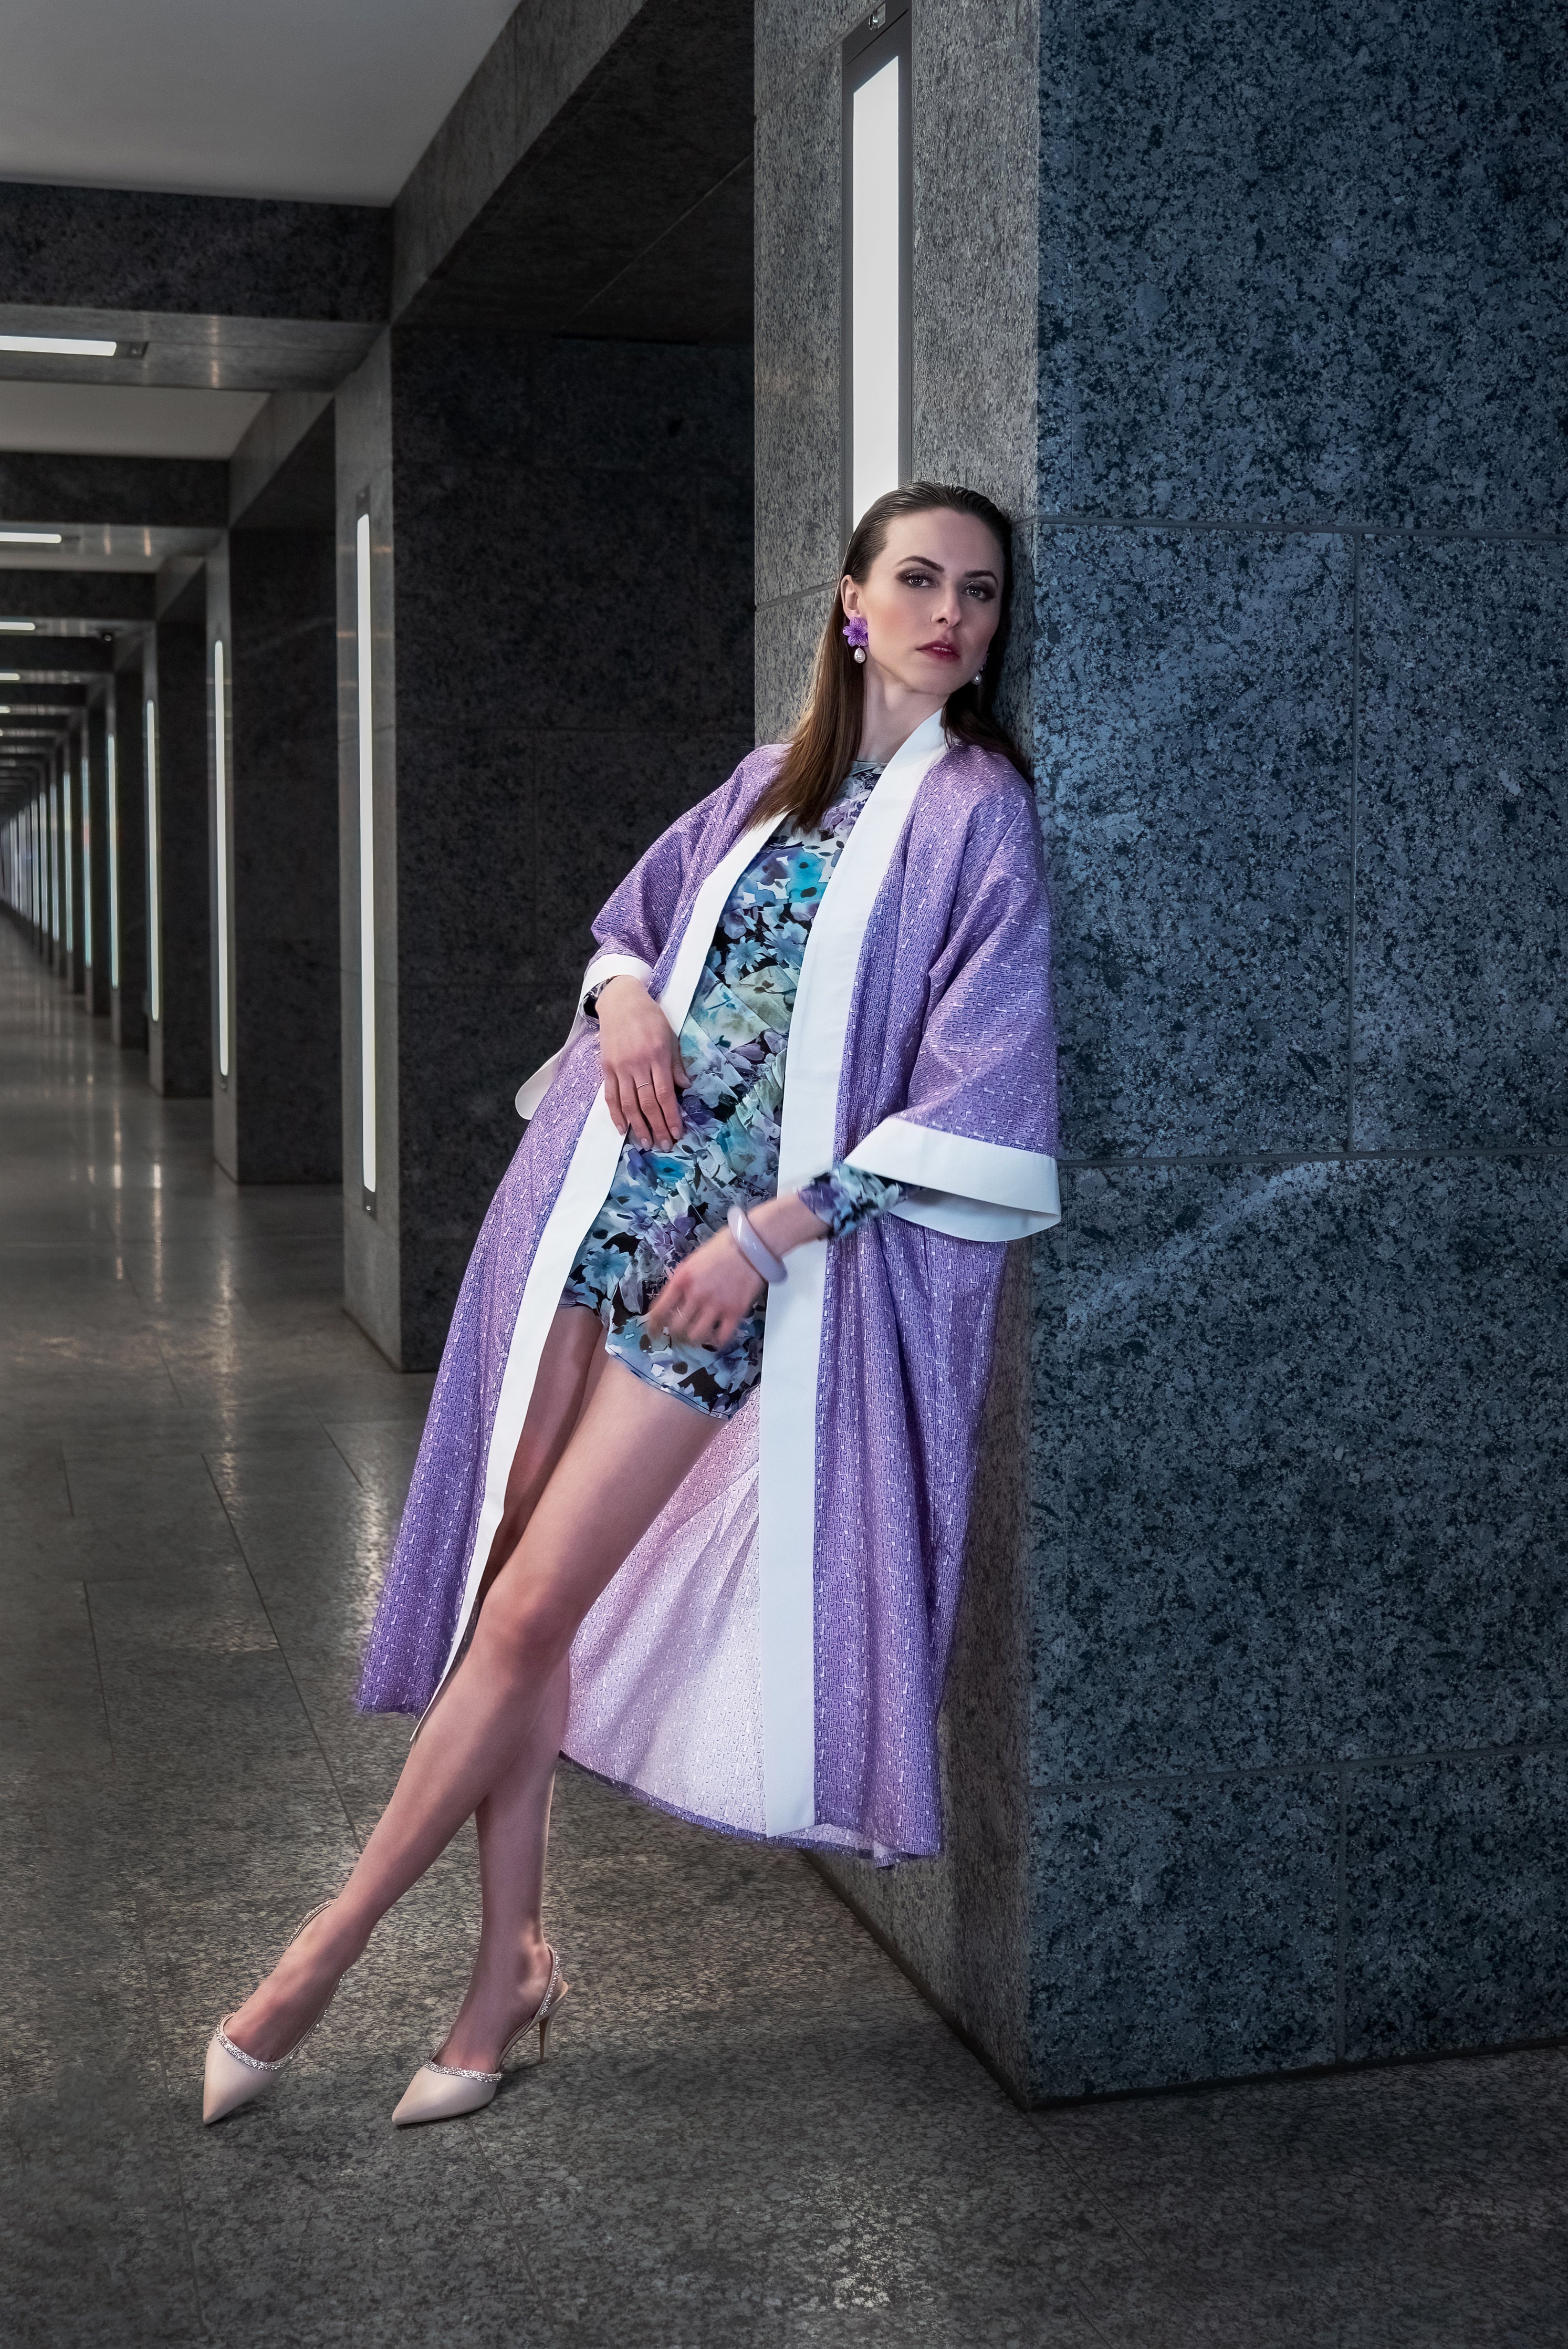 Model leaning against the wall, wearing a beautiful silk kimono with delicate lilac-hued elephant motifs, with a white collar and arm wrists.